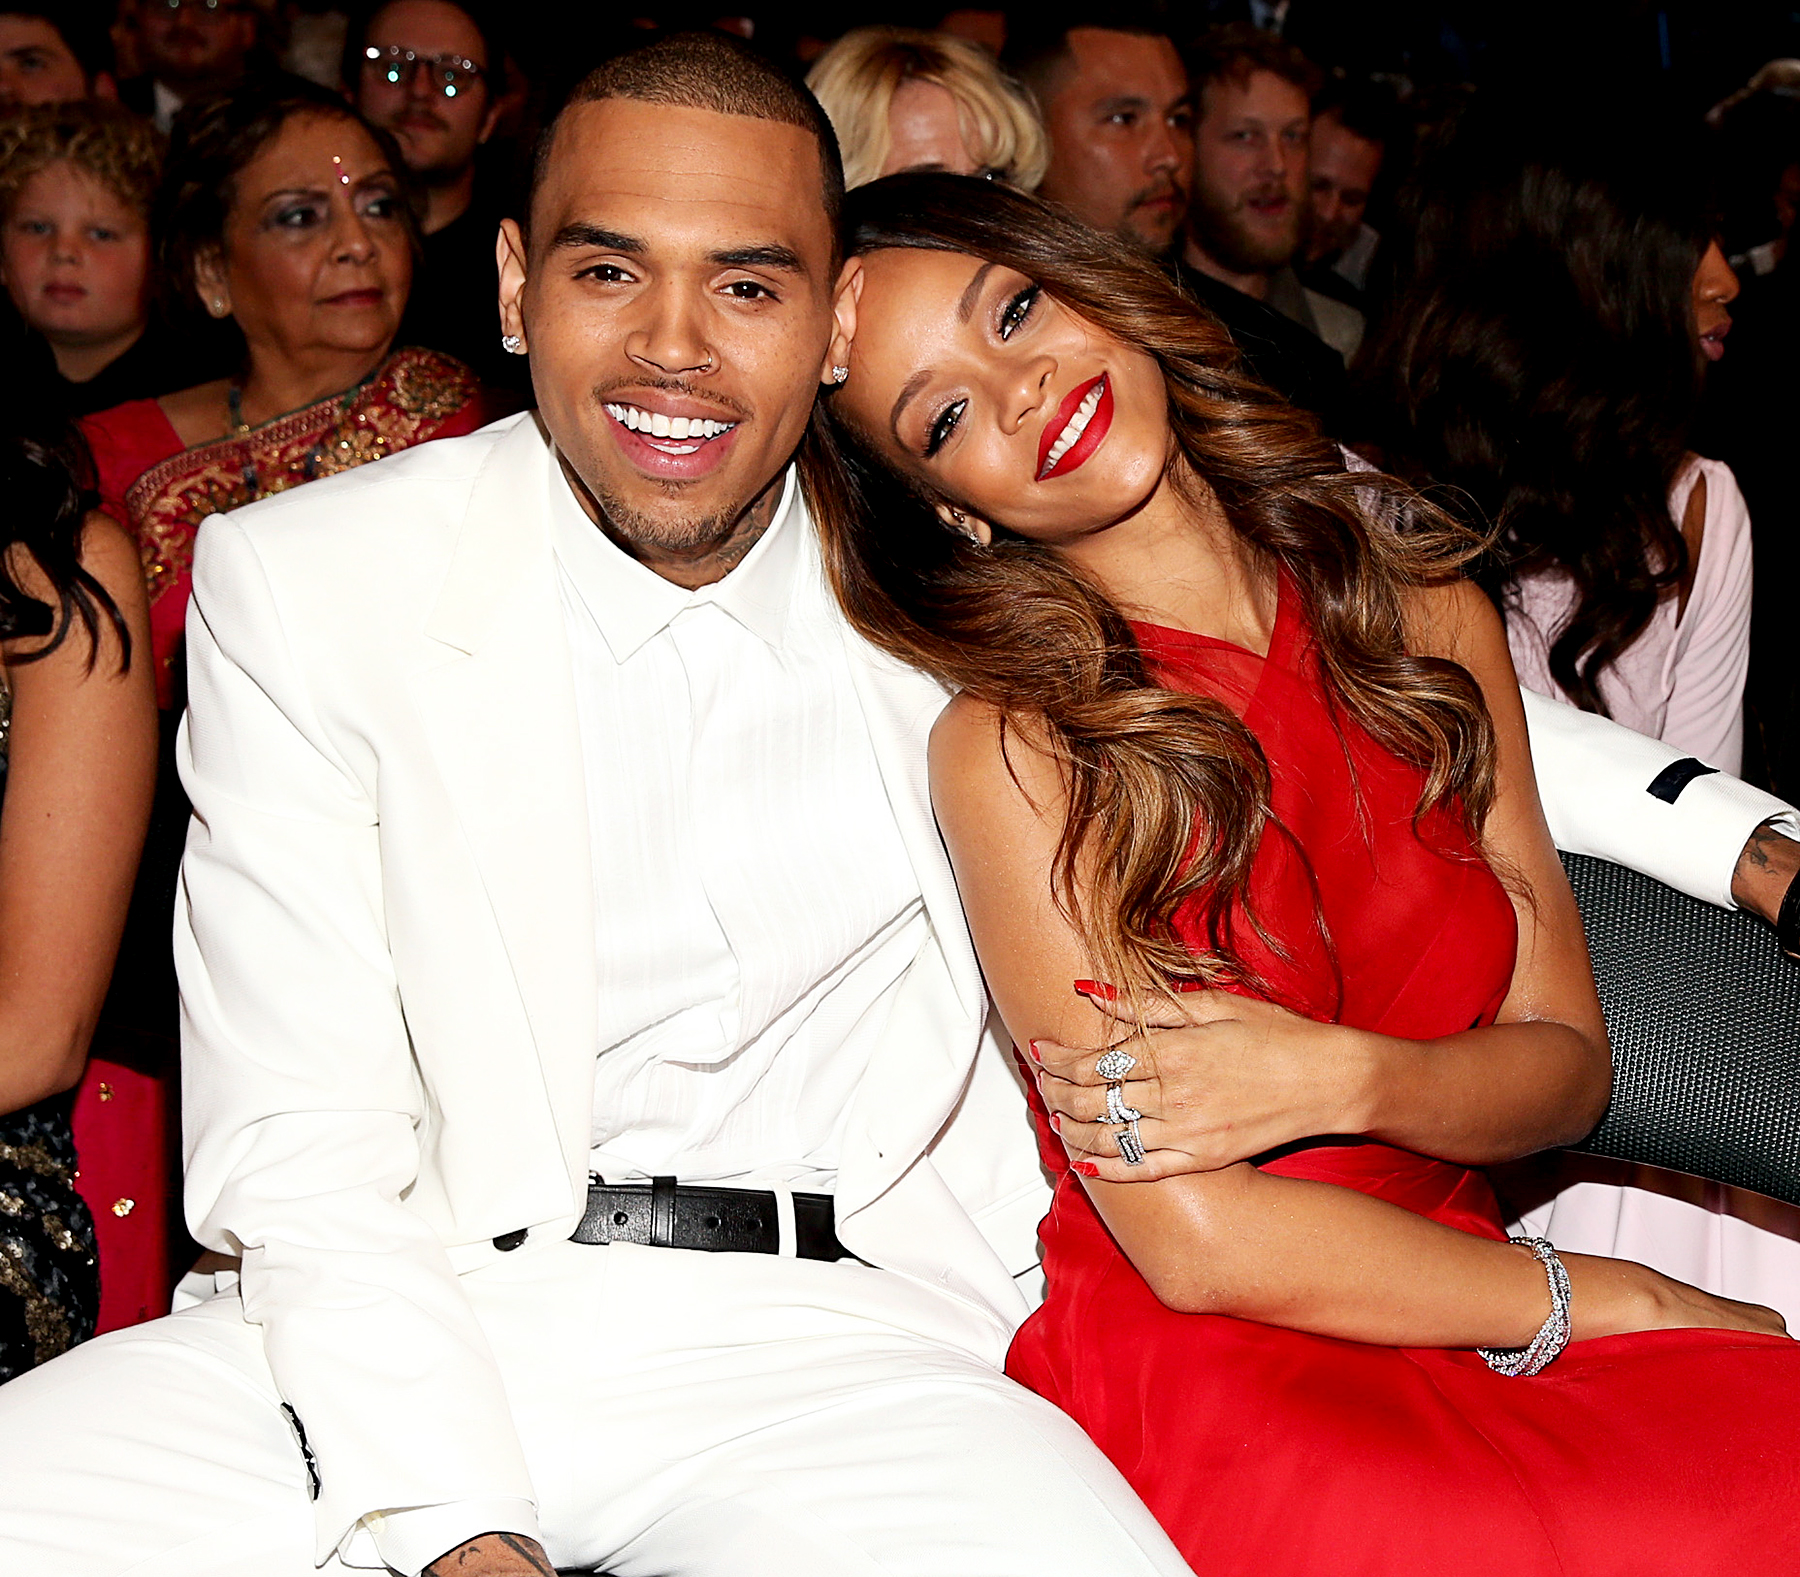 Rihanna and Chris Brown's Ups and Downs Through the Years